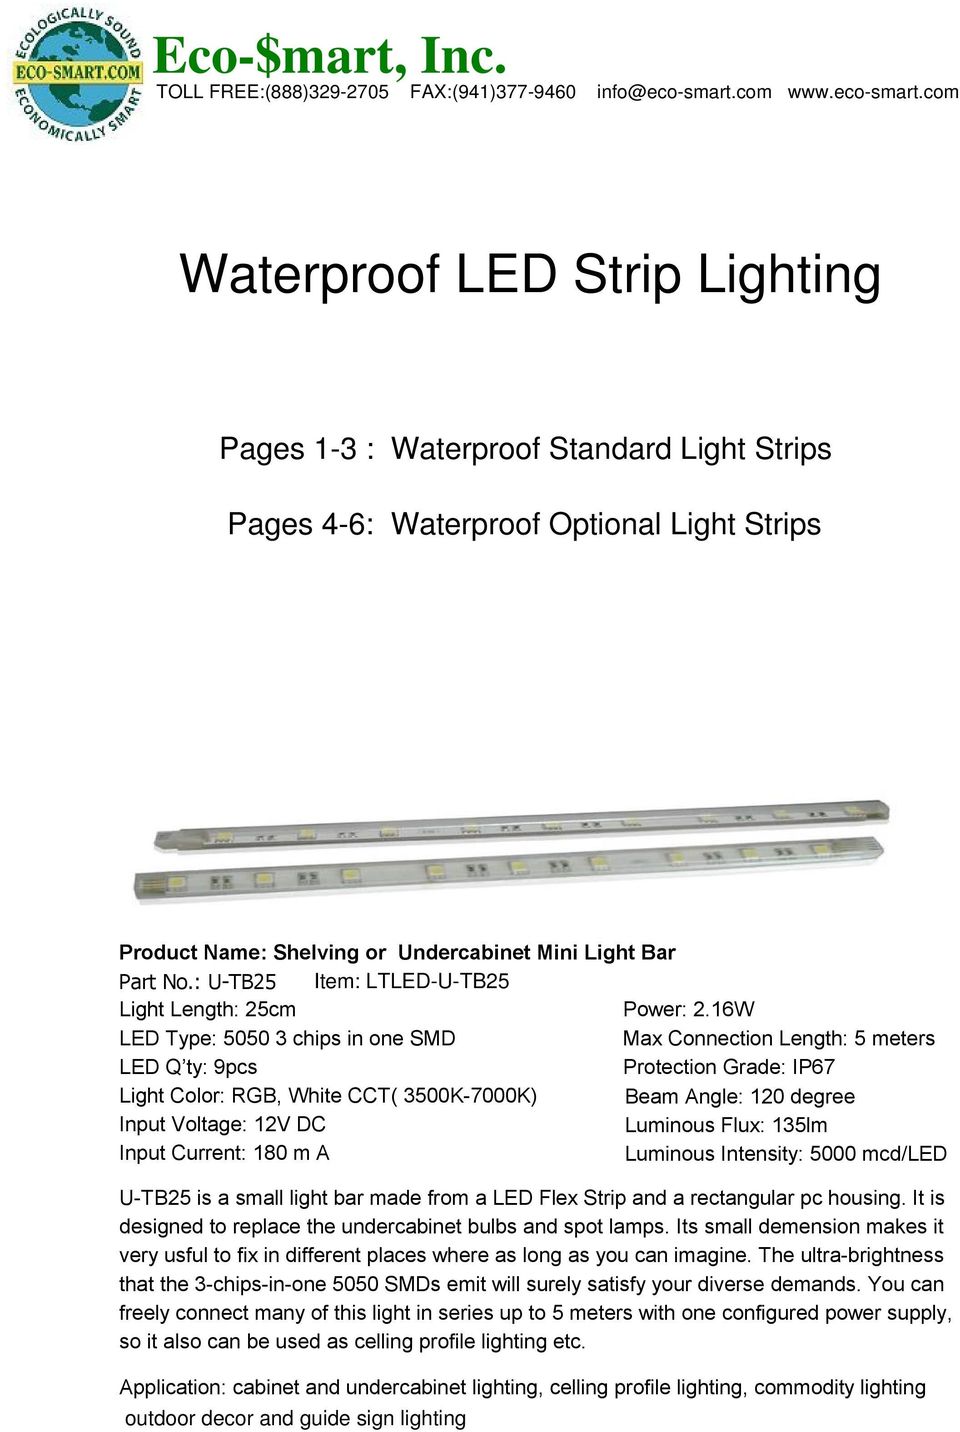 com Waterproof LED Strip Lighting Pages 1-3 : Waterproof Standard Light Strips Pages 4-6: Waterproof Optional Light Strips Product Name: Shelving or Undercabinet Mini Light Bar Part No.